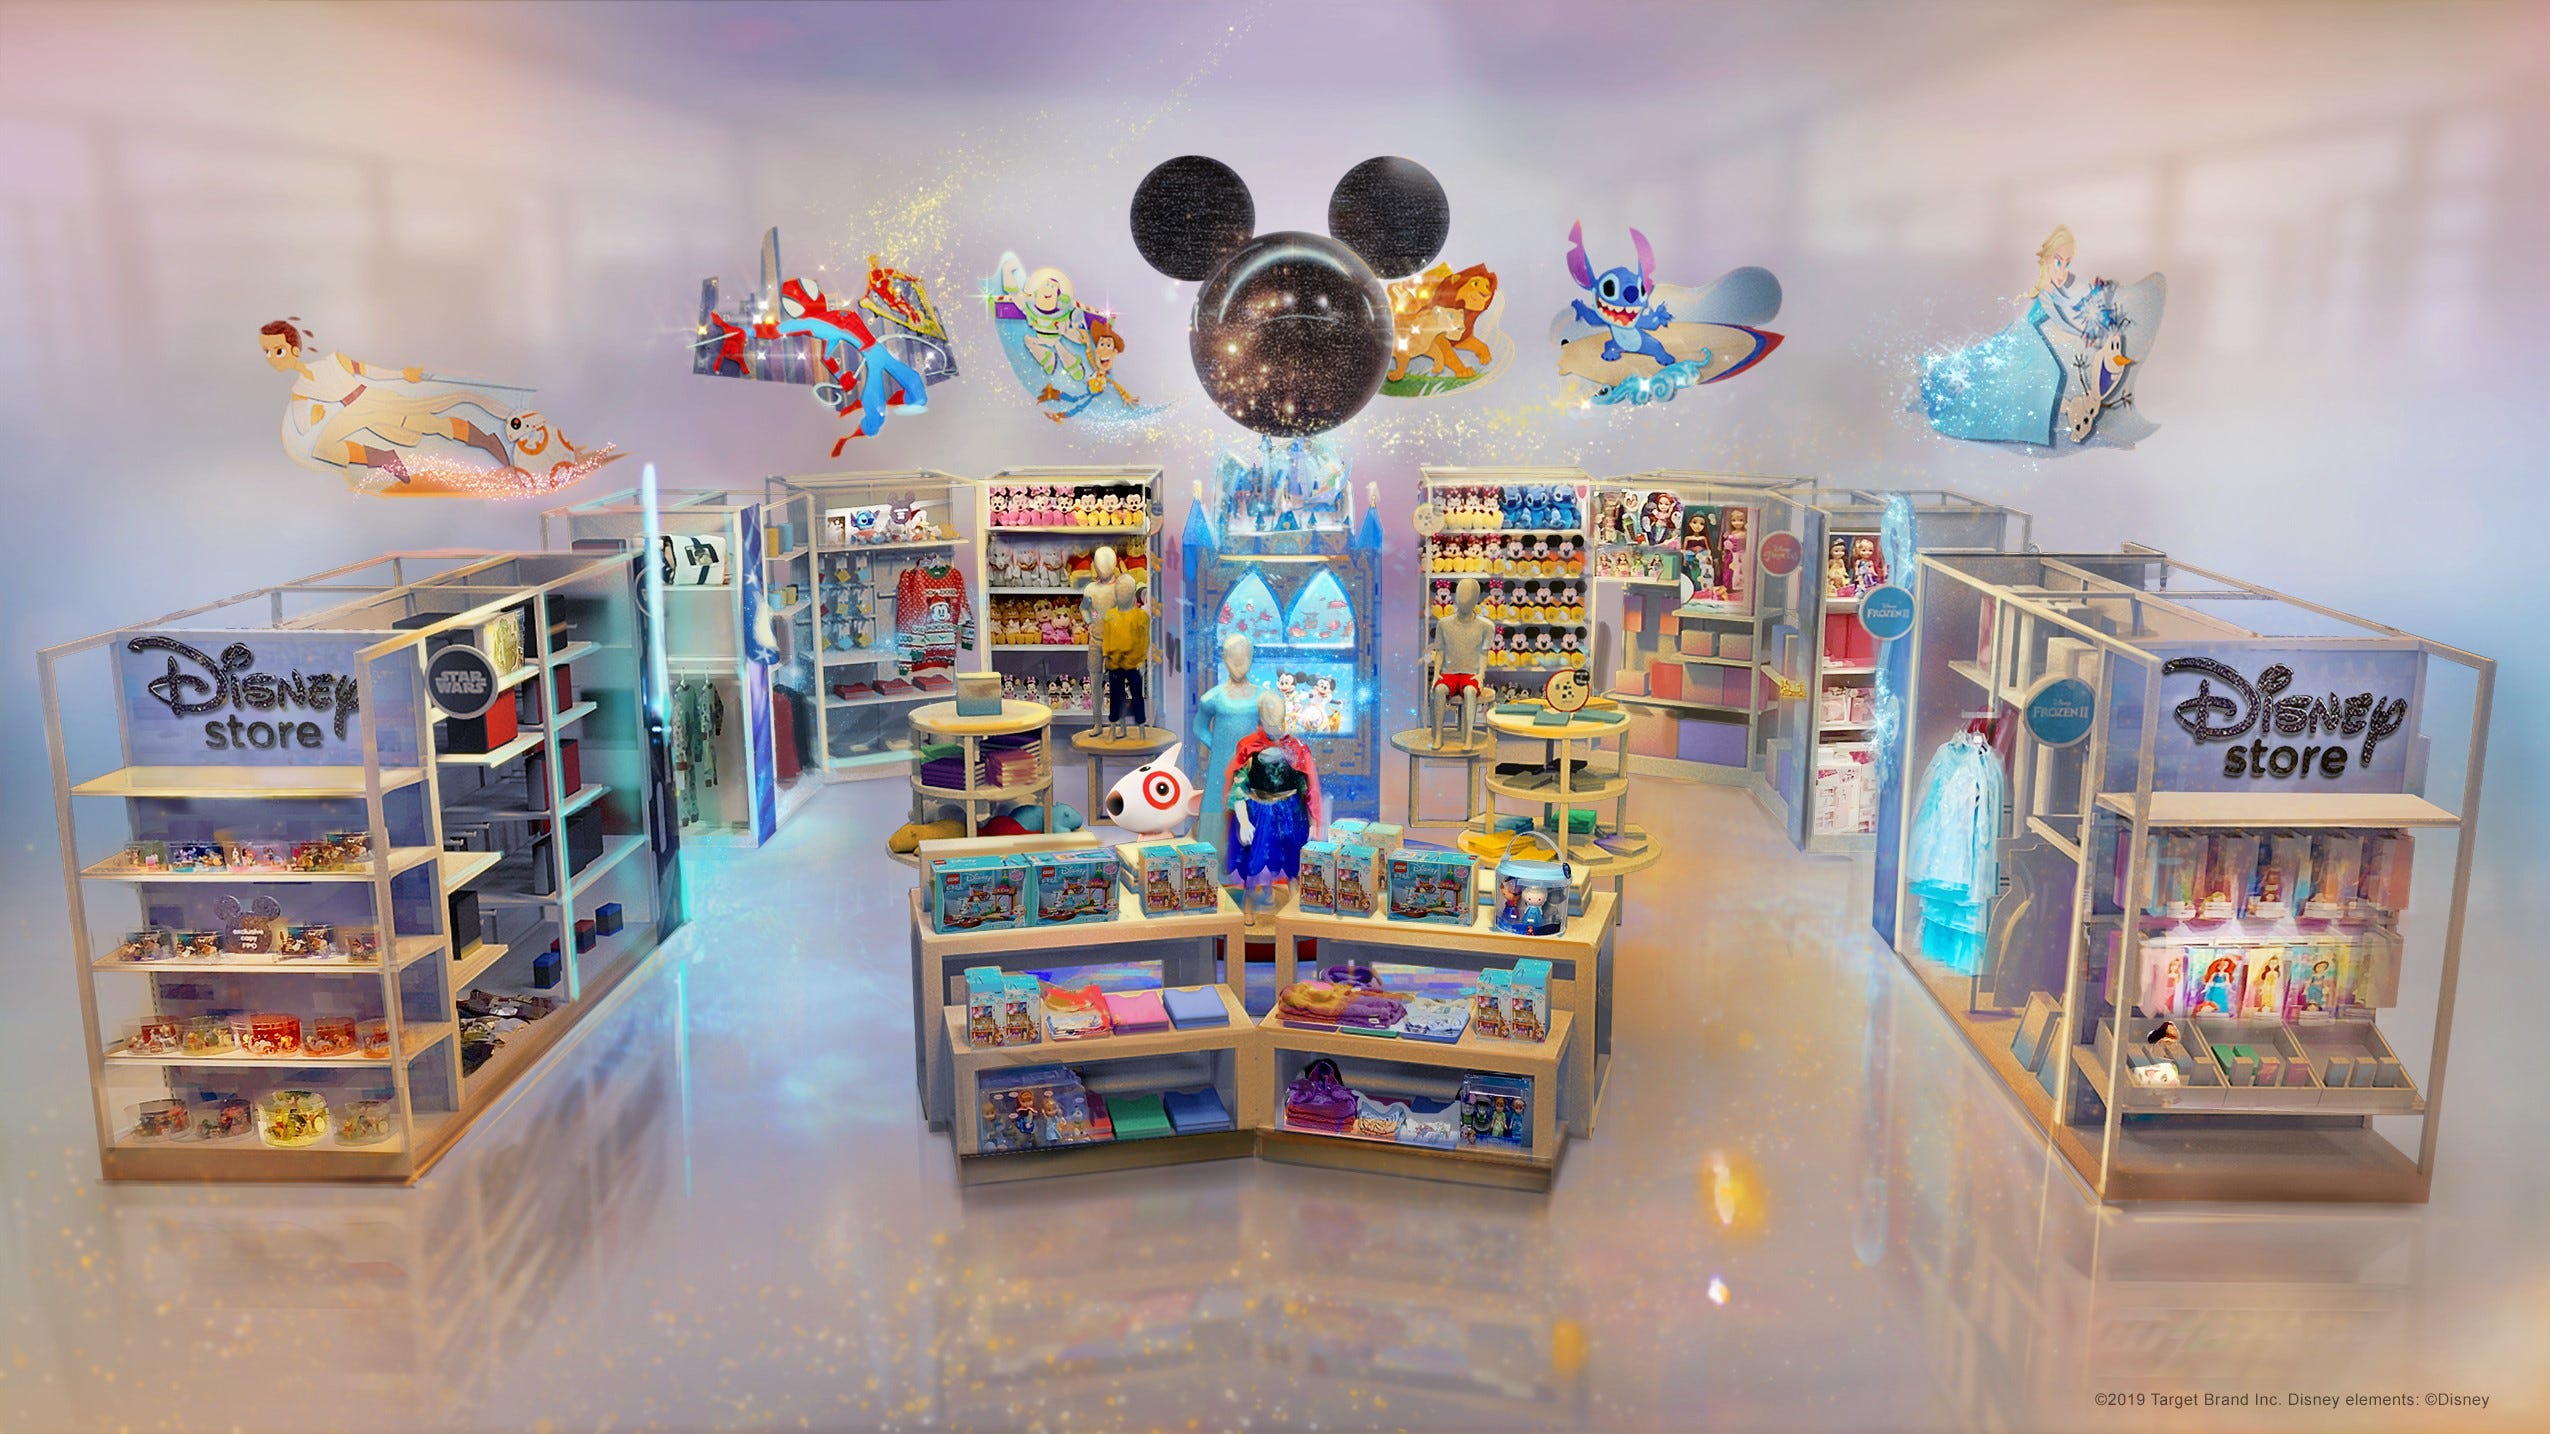 Target location near you may get Disney store in it